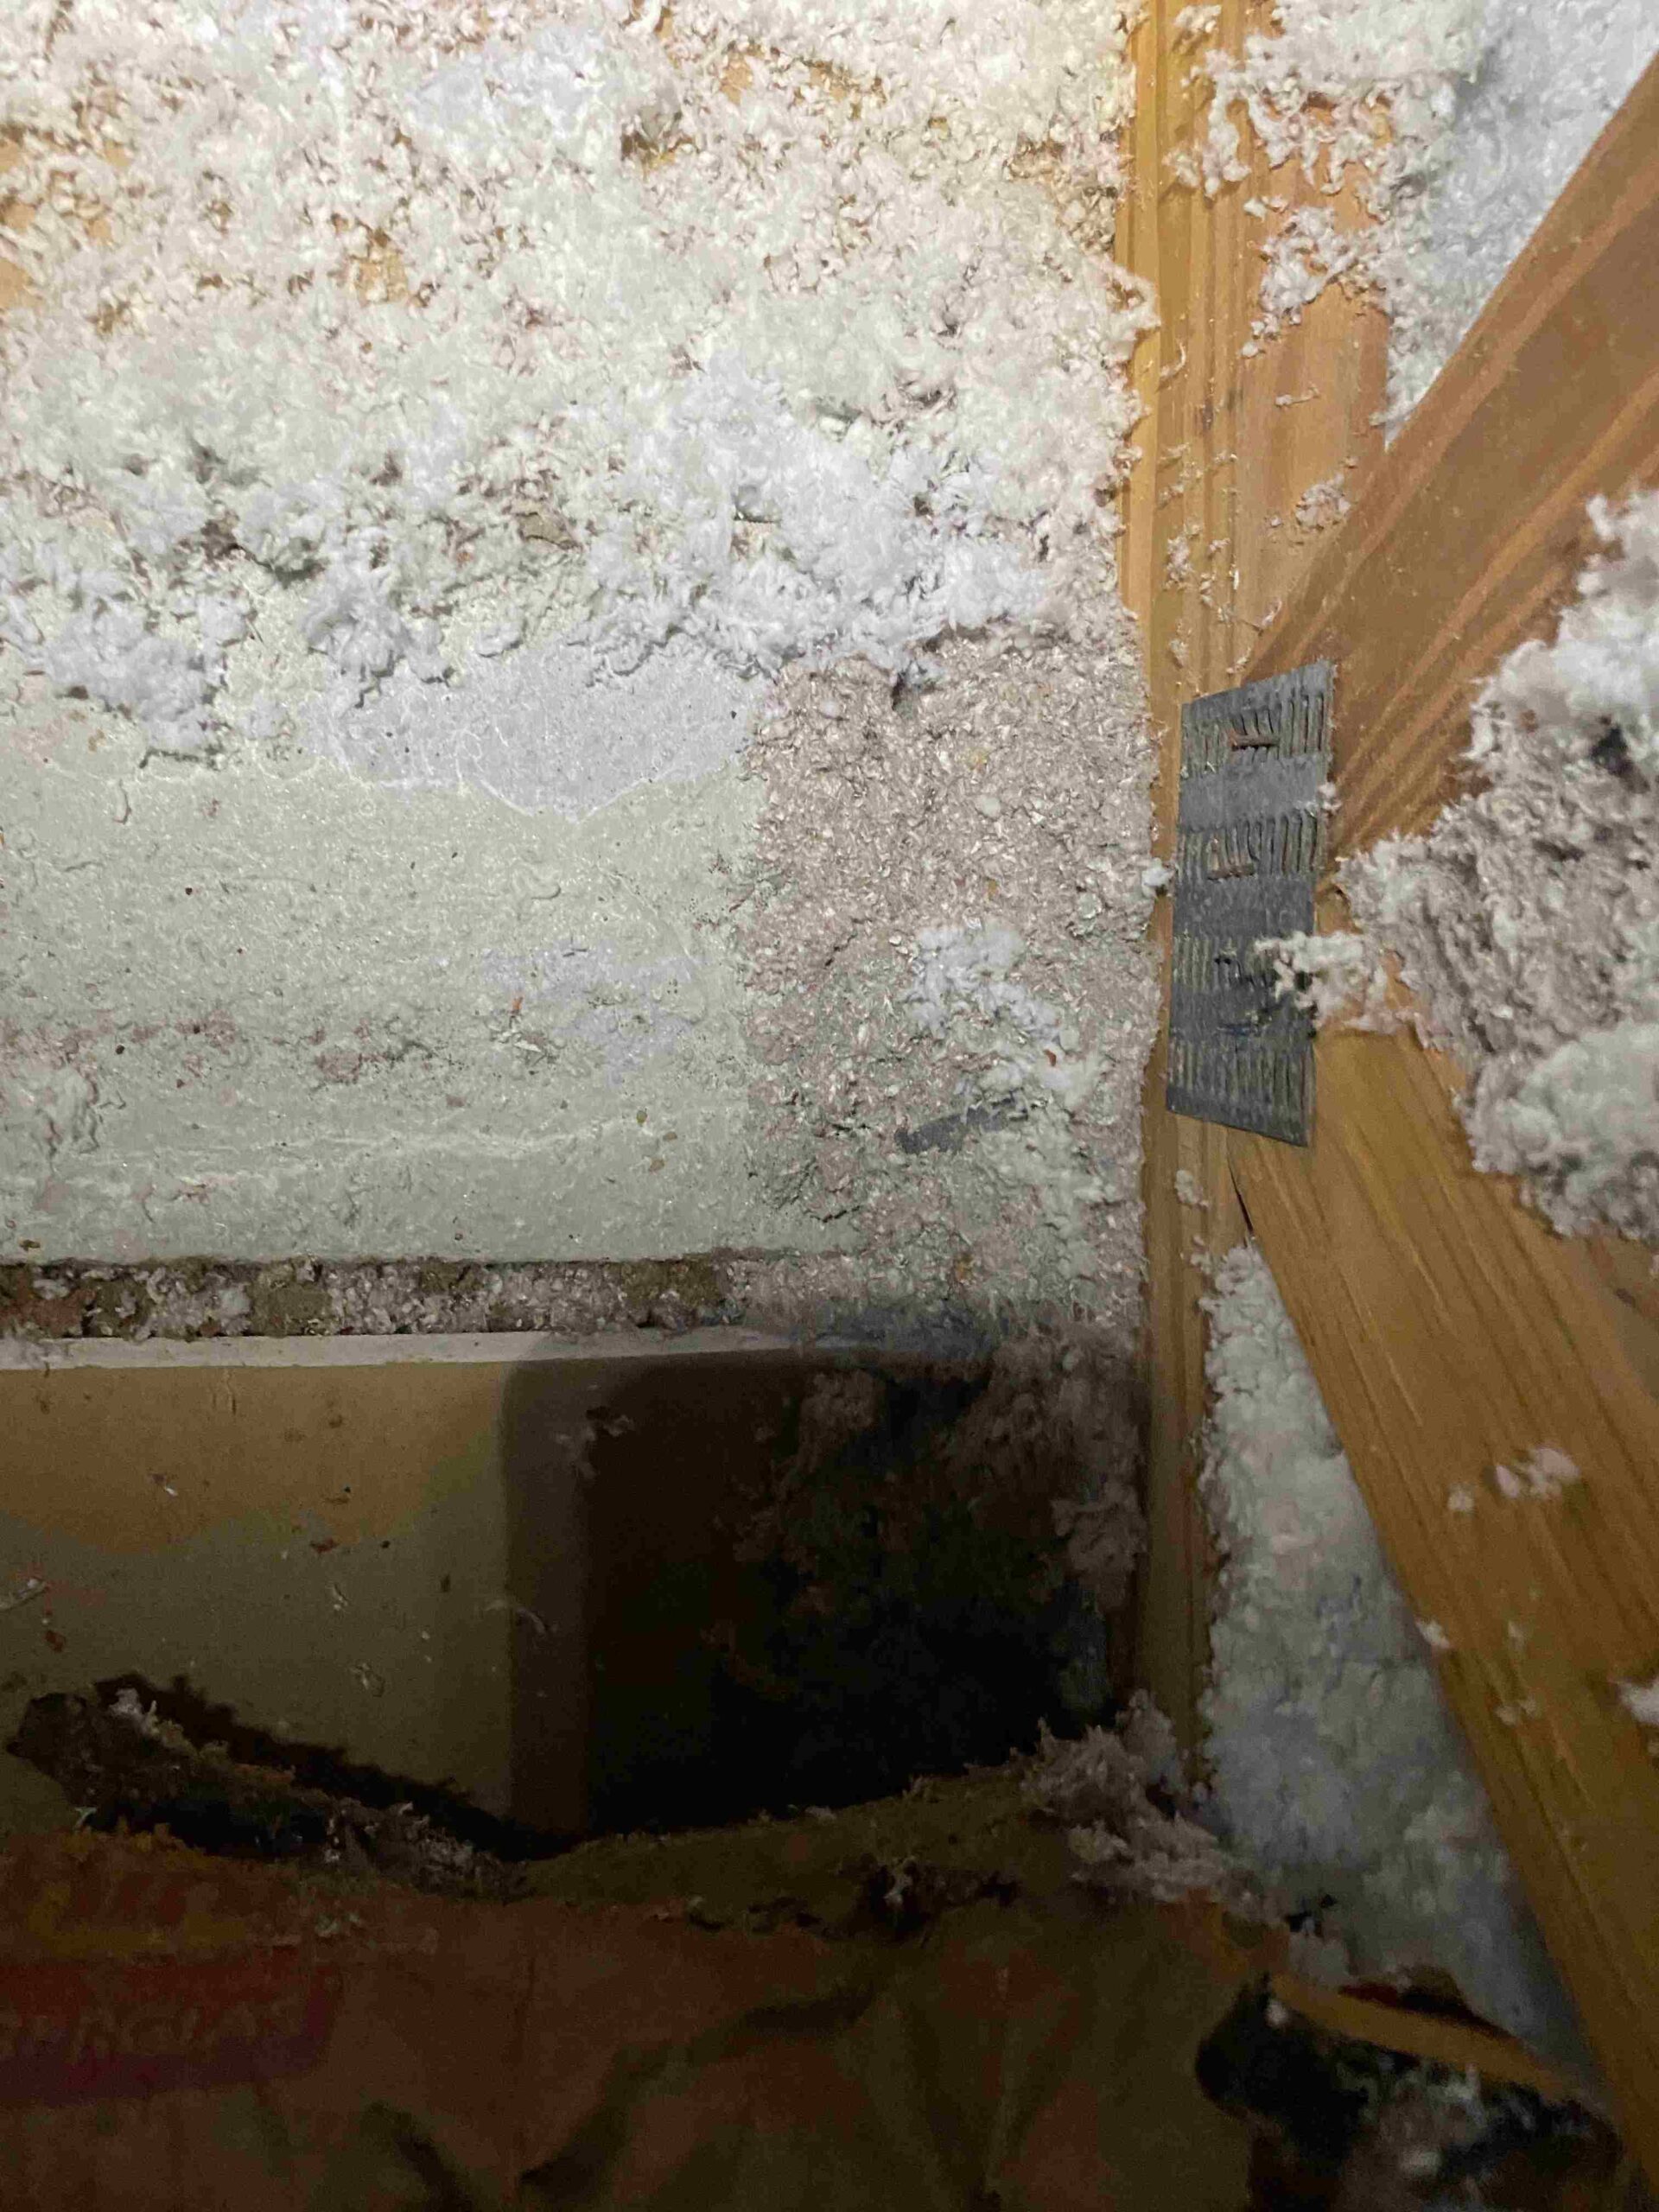 Cellulose (brown/grey) Insulation that was suppose to be completely removed by a new insulation company in our area. They just blew over it with different color insulation.